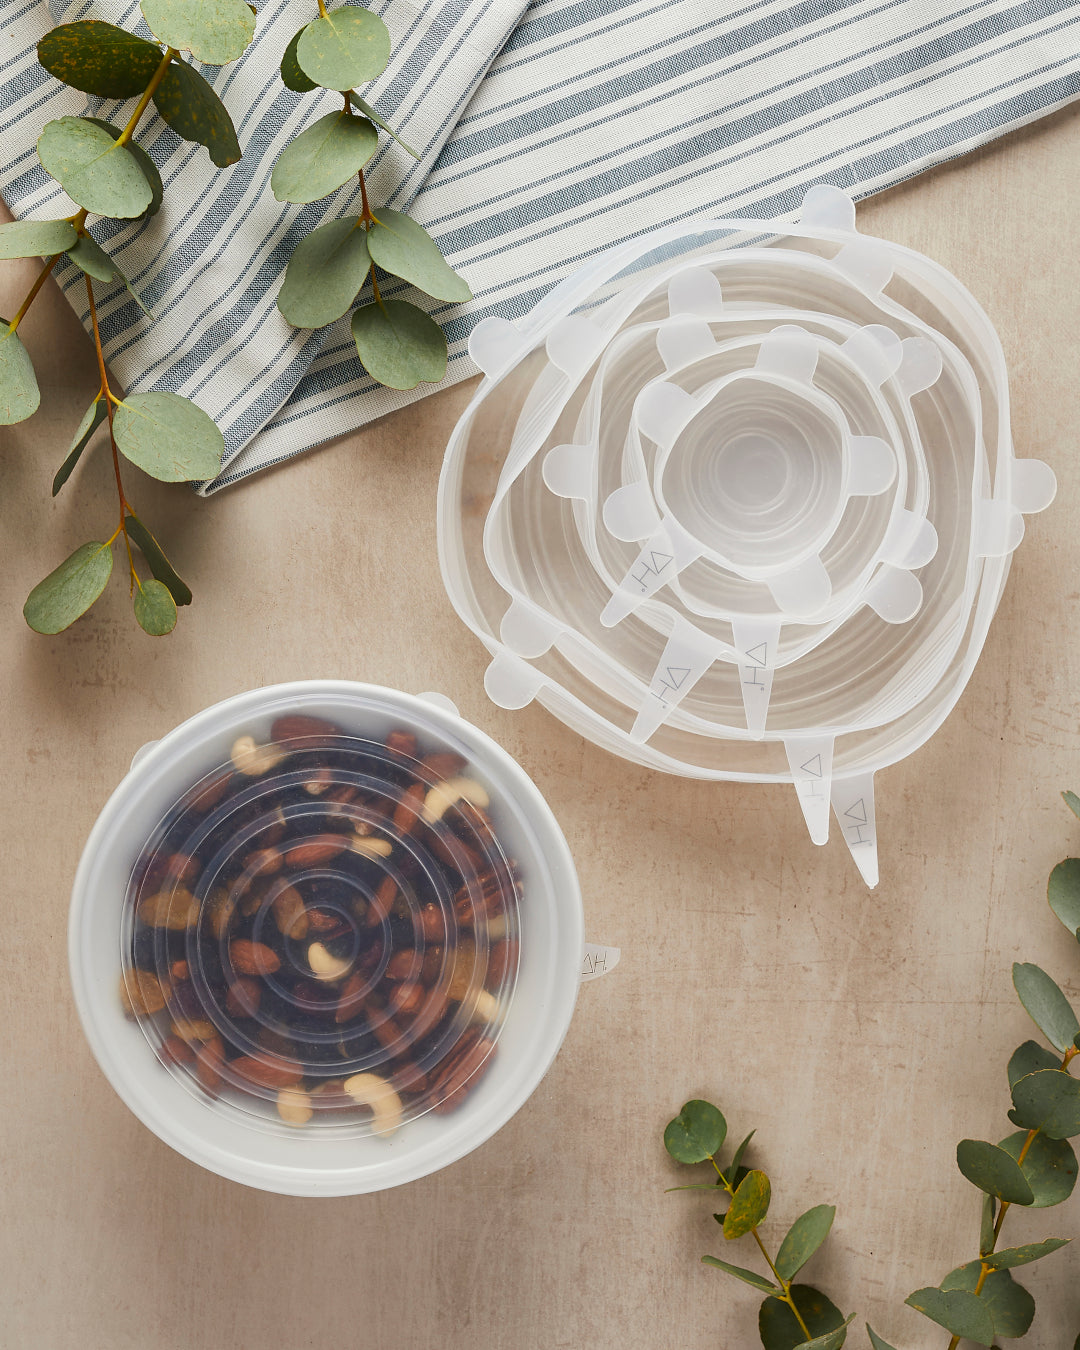 Transparent silicone lids in various sizes, effortlessly stretching over bowls and containers, illustrating their eco-friendly, reusable nature and superior food storage capabilities.